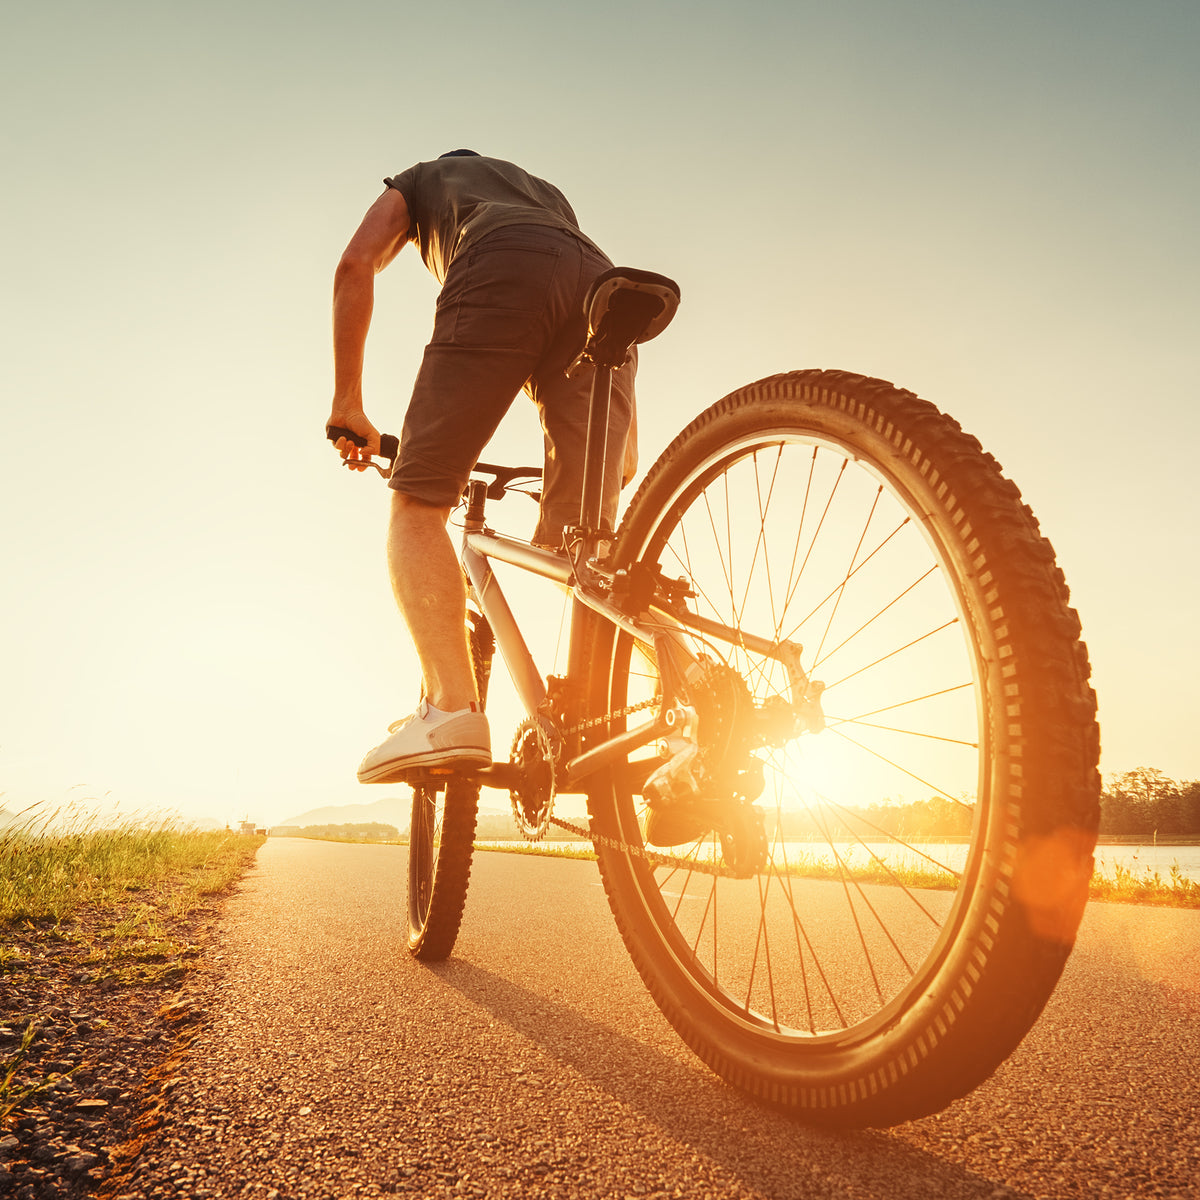 10 Tips For Bike Riding In Summer Heat